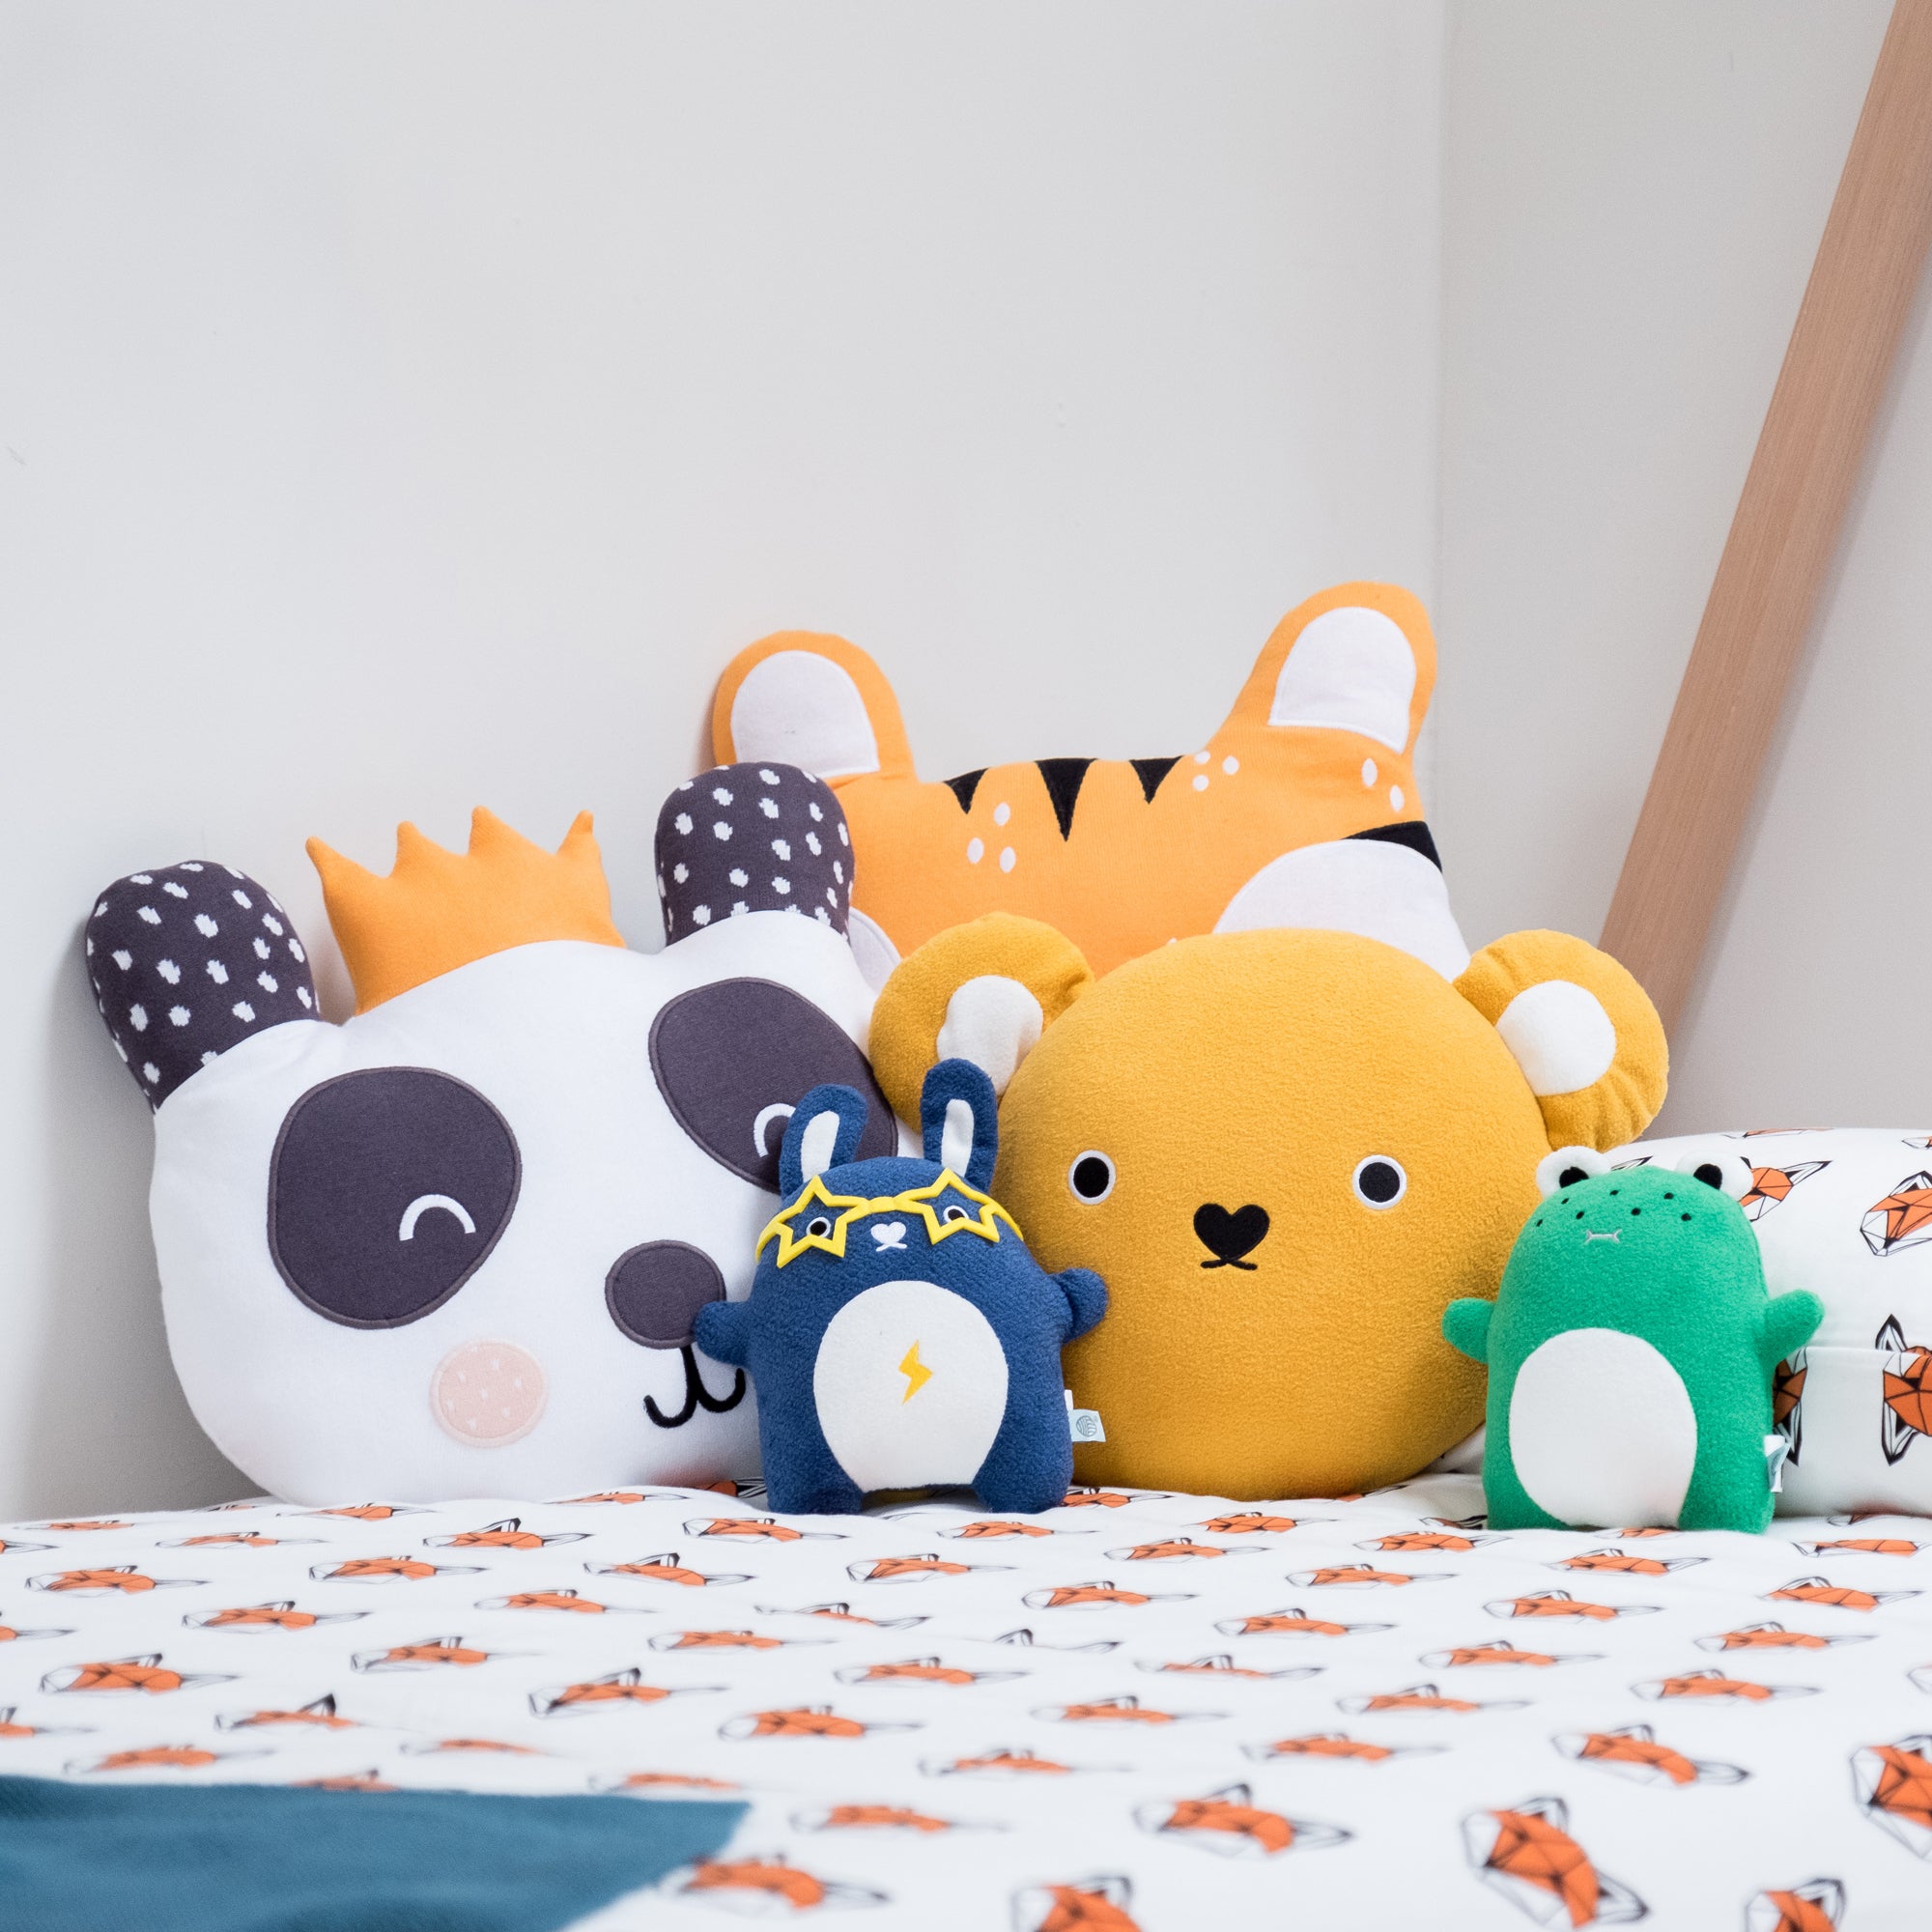 Children's Cushions and Soft Toys, available at Bobby Rabbit.